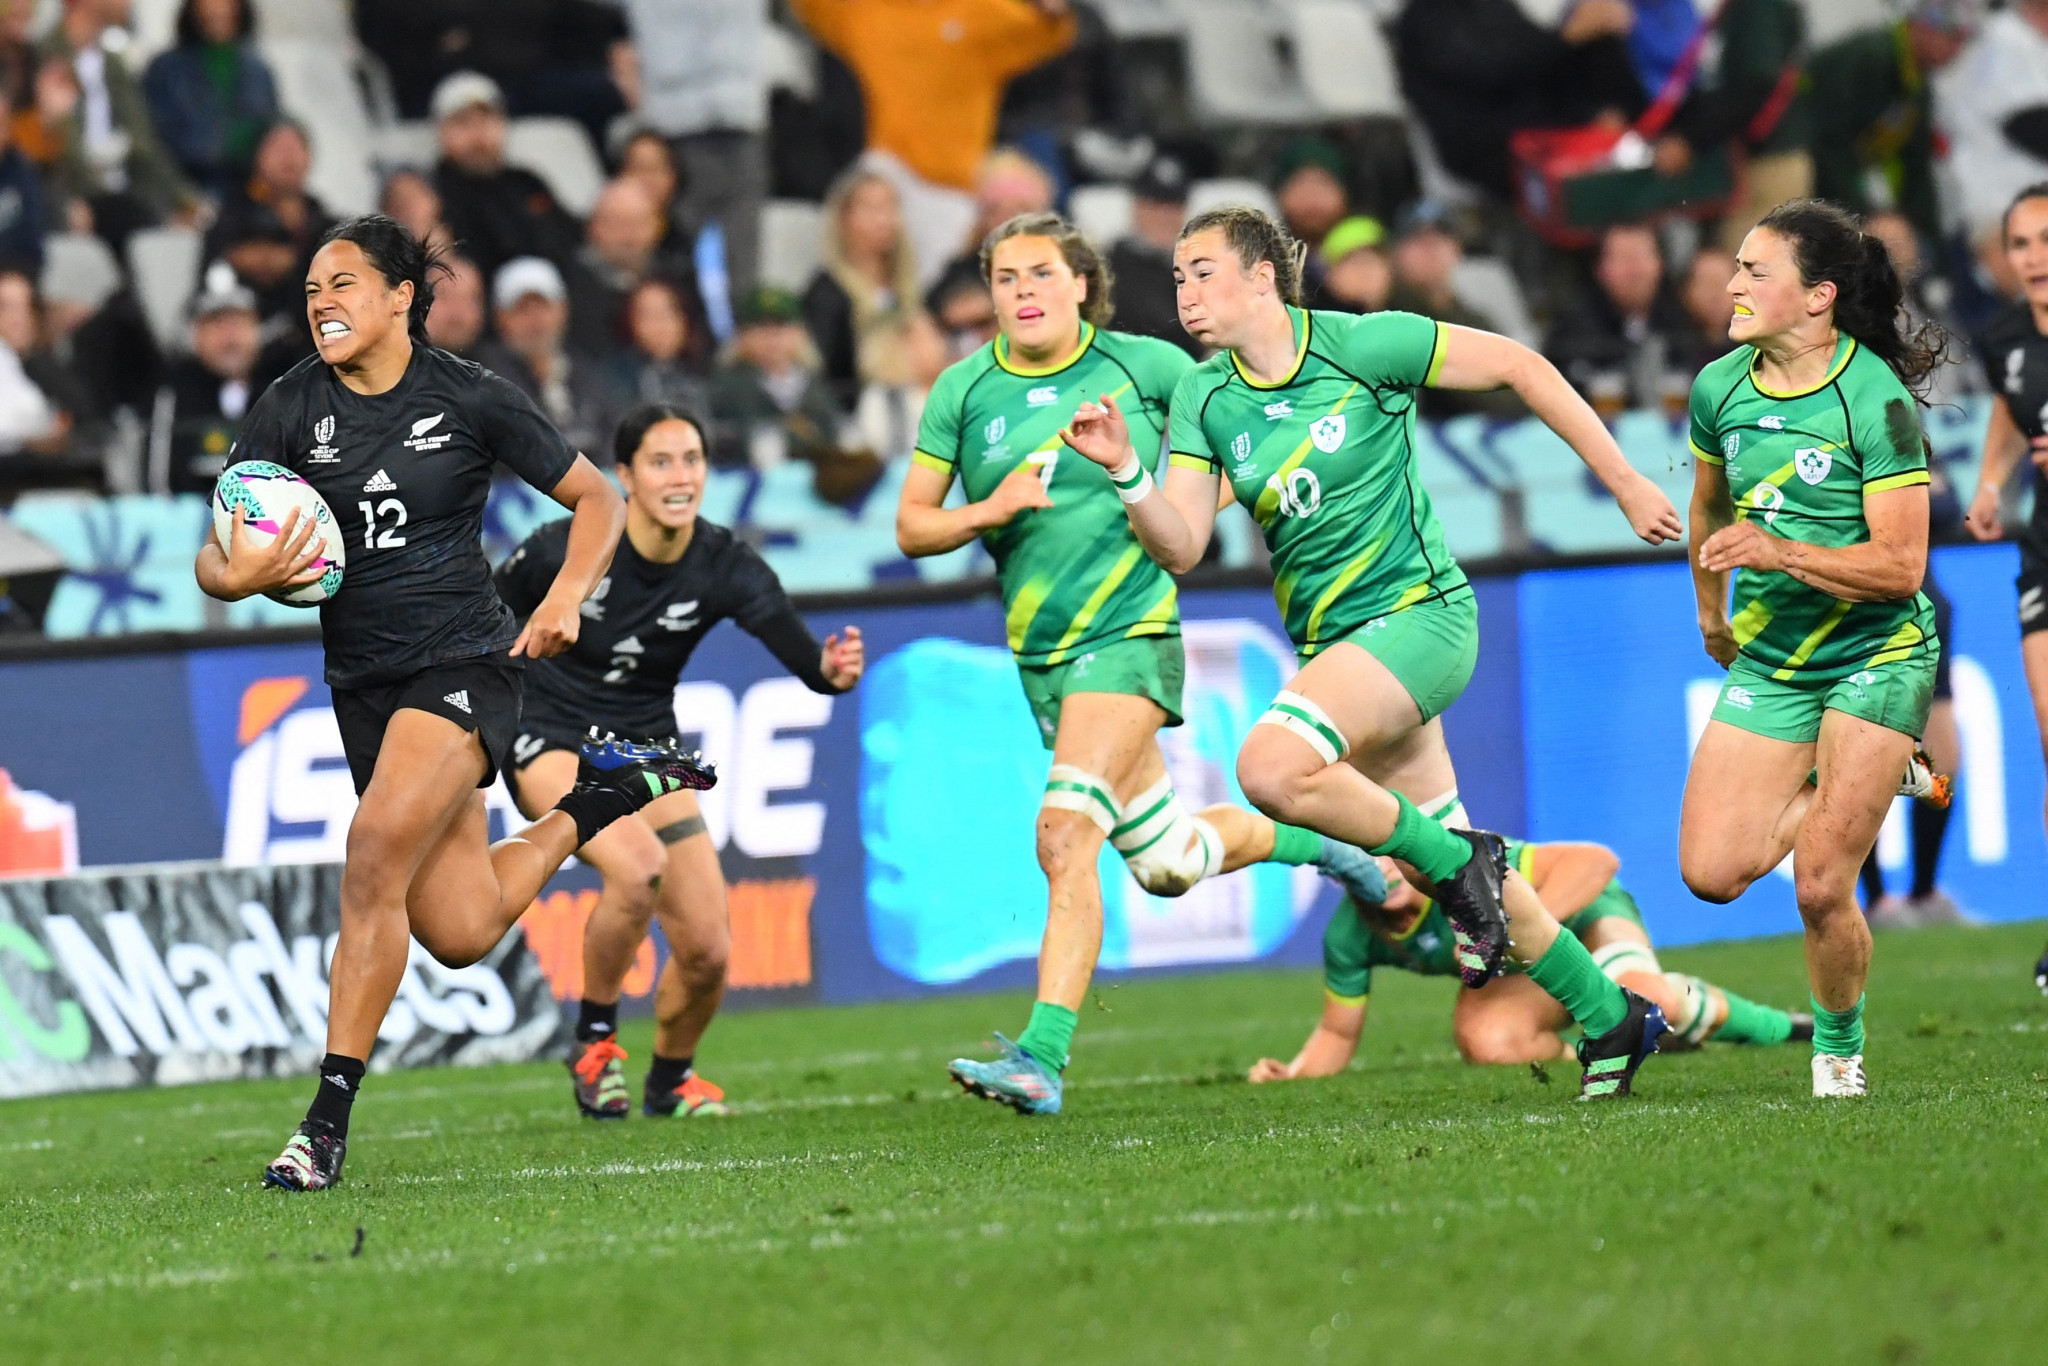 New Zealand beat Ireland 28-0 in the Rugby World Cup Sevens to advance to the semi-finals in the women's tournament ©Getty Images